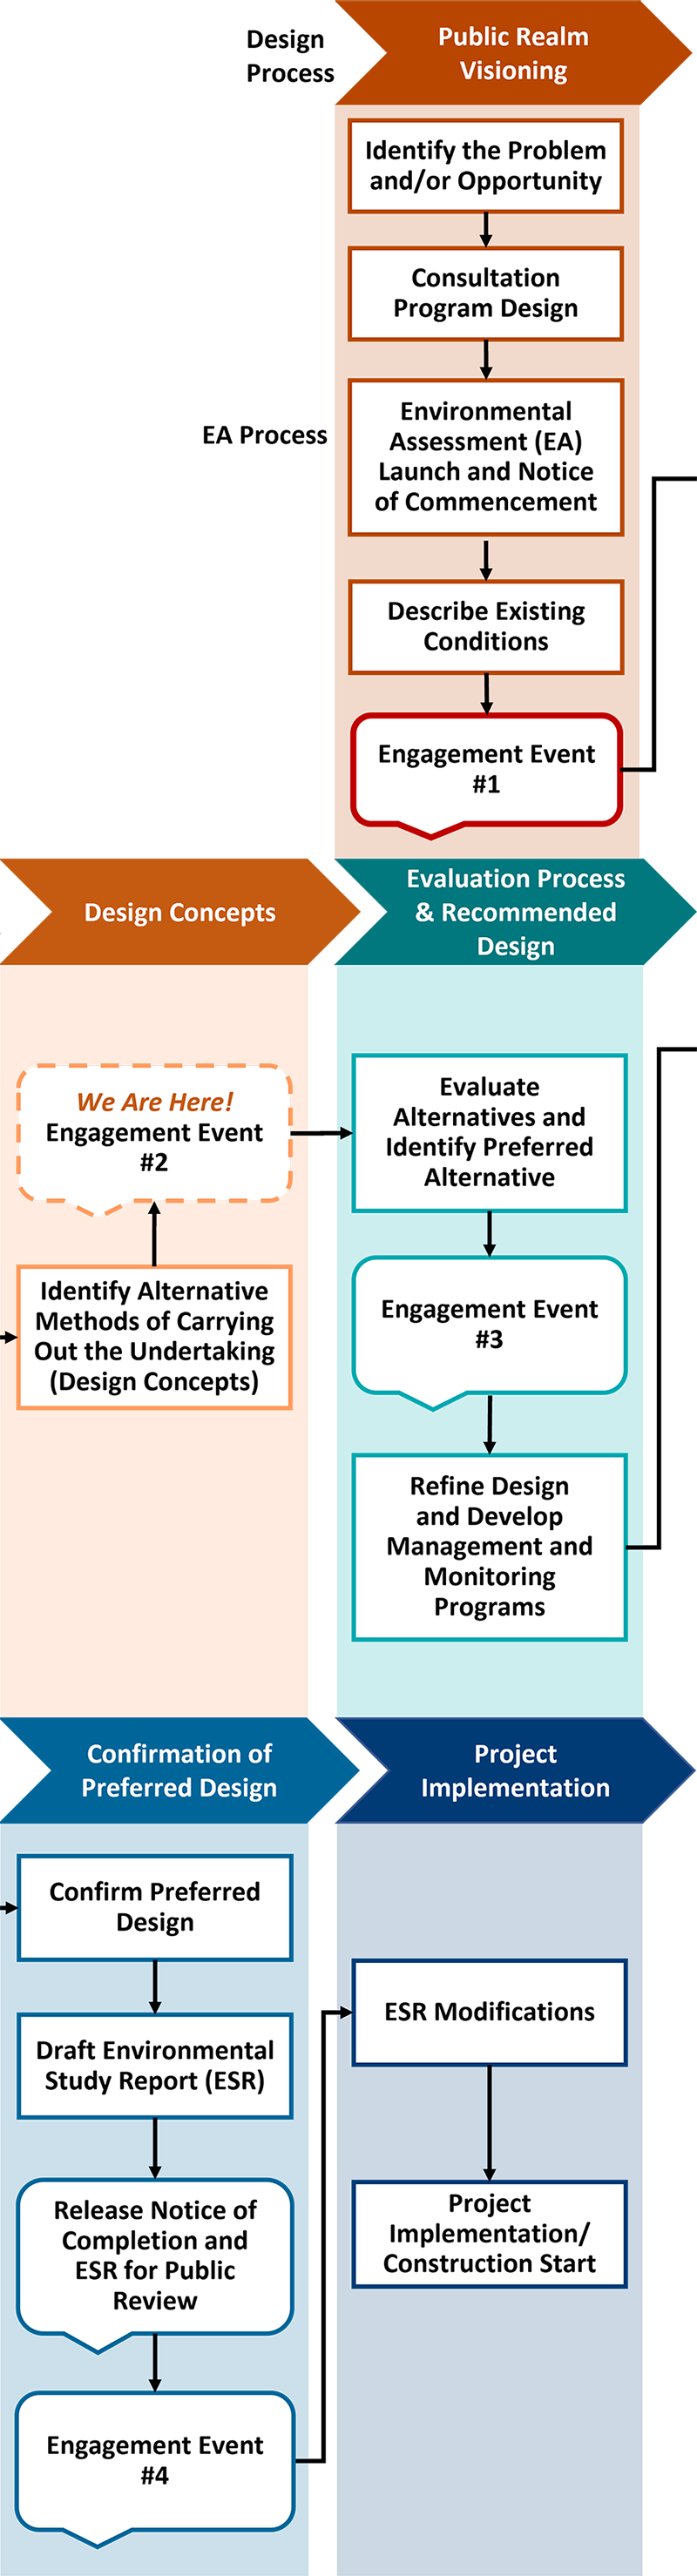 Graphic showing the design process at the top with five steps left to right: public realm visioning; conceptual design options; evaluation process and recommended design; confirmation of preferred design; and project implementation. Below is the EA process with text boxes and connecting arrows showing the order of steps and which ones occur at the same time as the design process steps. Under the public realm visioning, the EA steps in order are: identify the problem and/or opportunity; consultation program design; environmental assessment land and notice of commencement; describe existing conditions and engagement event number 1. Under conceptual design options, the EA steps are: identify alternative methods of carrying out the undertaking (design options), and engagement event number two which also reads "we are here". Under evaluation process and recommended design, the EA steps are: evaluate alternatives and identify preferred alternative; Engagement event number three; and refine design and develop management and monitoring programs. Under confirmation of preferred design, the EA steps are: confirm preferred design; draft environmental study report (ESR); release notice of completion and ESR for public review; and Engagement event number four. Under project implementation, the EA steps are: ESR modifications; and project implementation/construction start. 